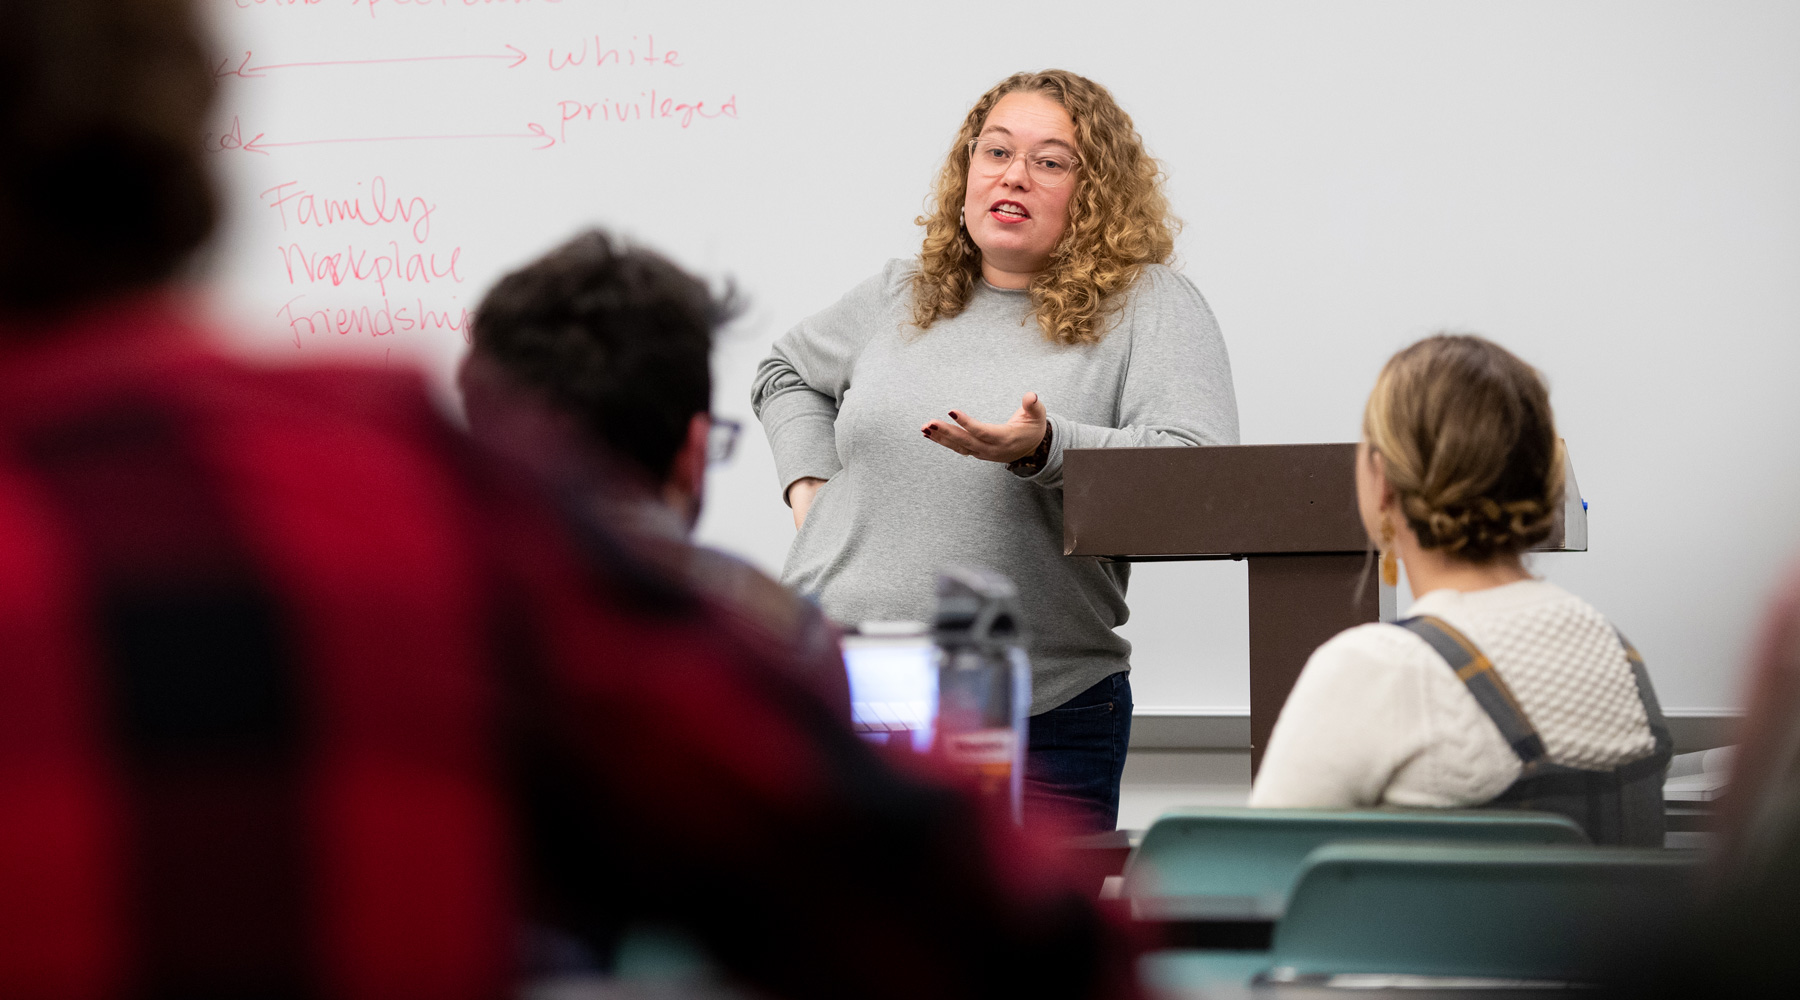 President's Medallion winner Briellen Griffin teaches Multiculturalism in the U.S.: Culture Quest in Film & Literature at DePaul University as Adjunct Faculty.  (Photo: Lukas Keapproth)